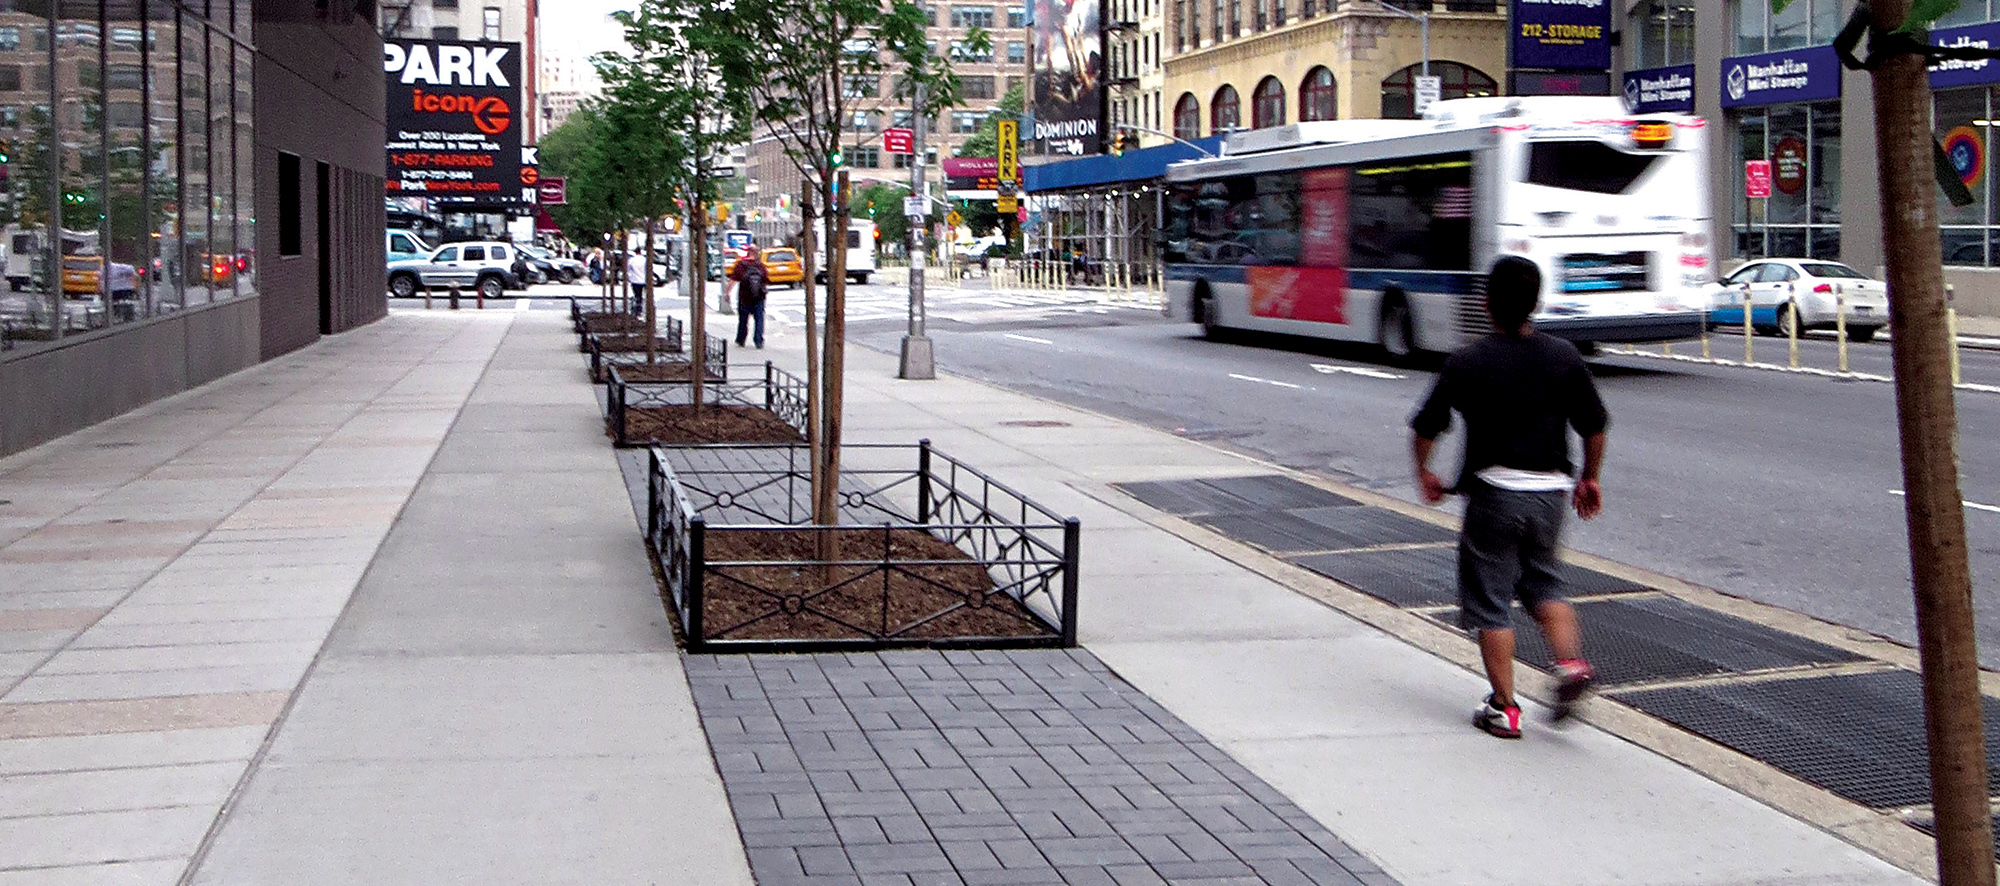 Tree islands disrupt dark grey Eco-Priora pavers along the walkway, as a pedestrian and a bus pass nearby.